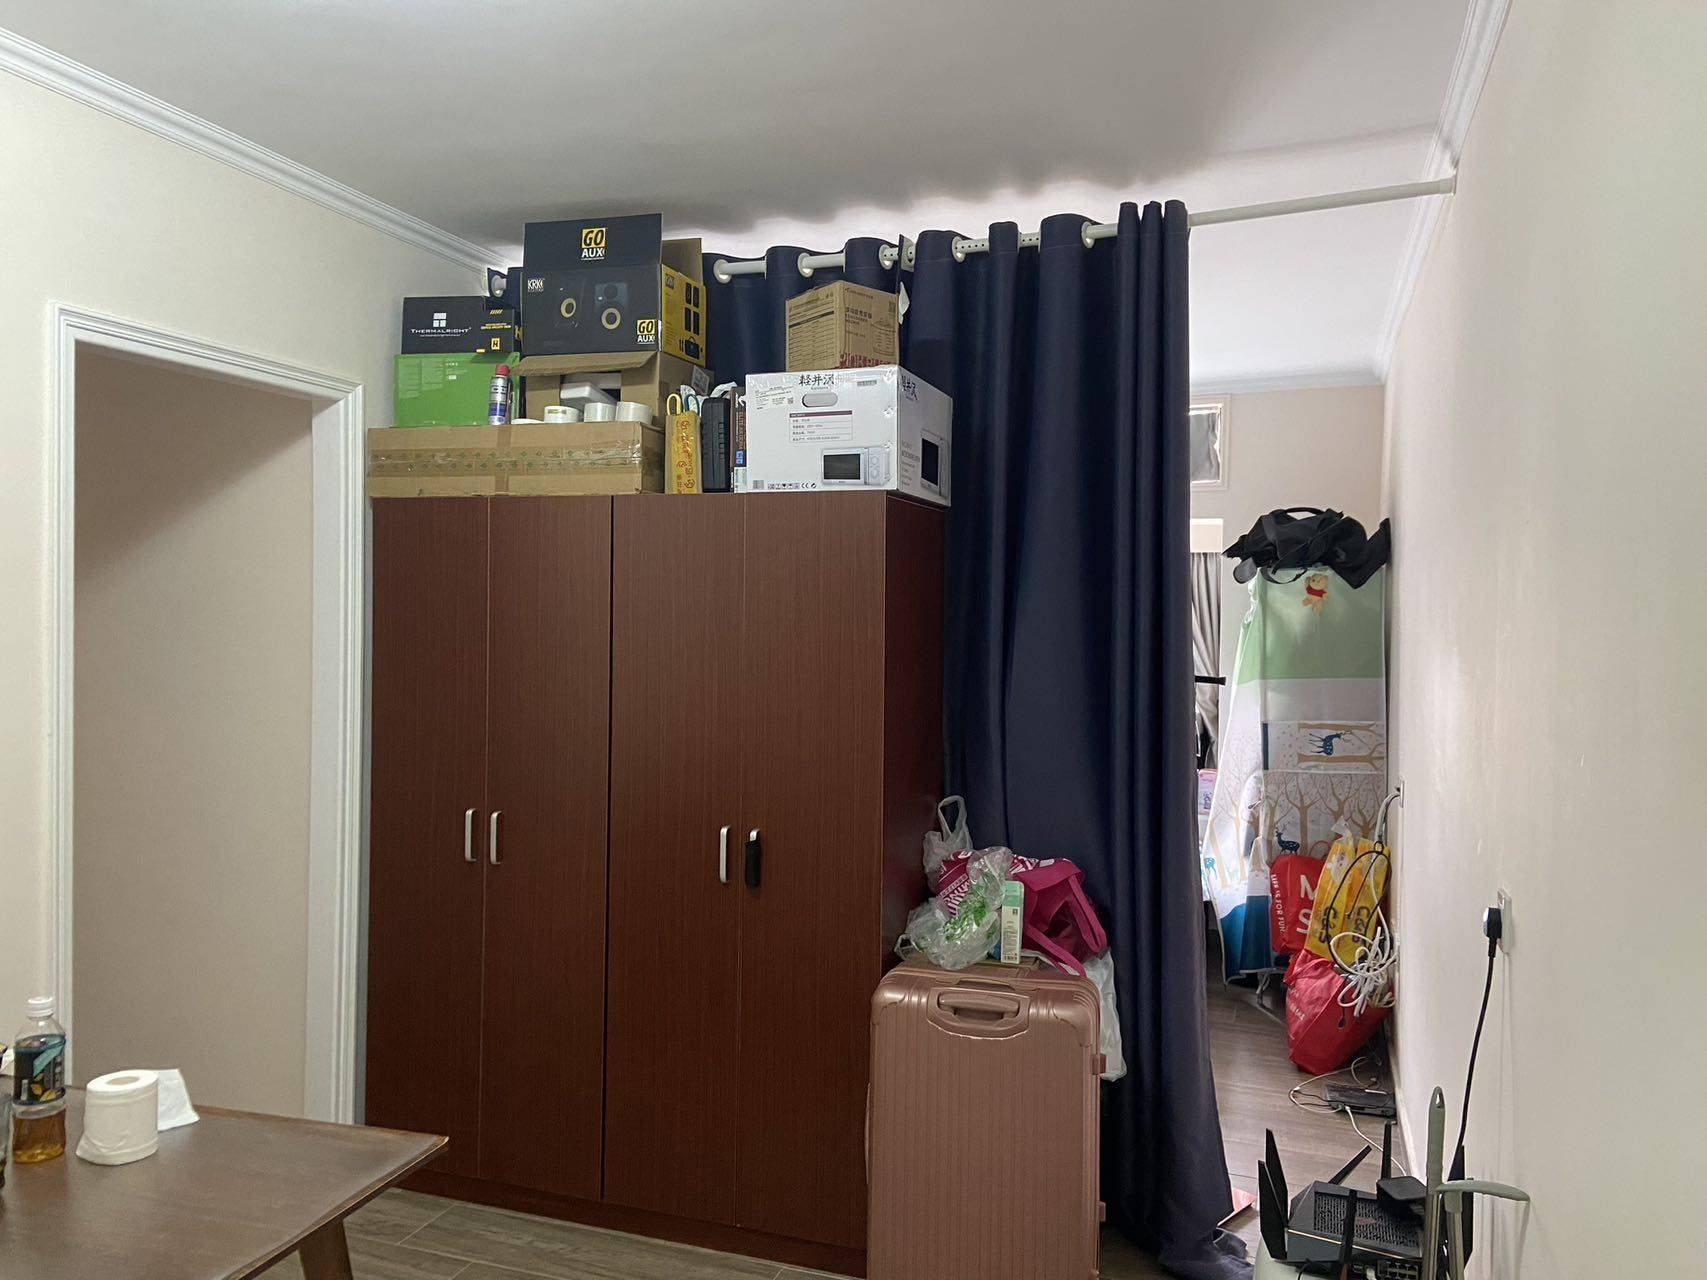 Hong Kong-New Territories-Cozy Home,Clean&Comfy,No Gender Limit,Chilled